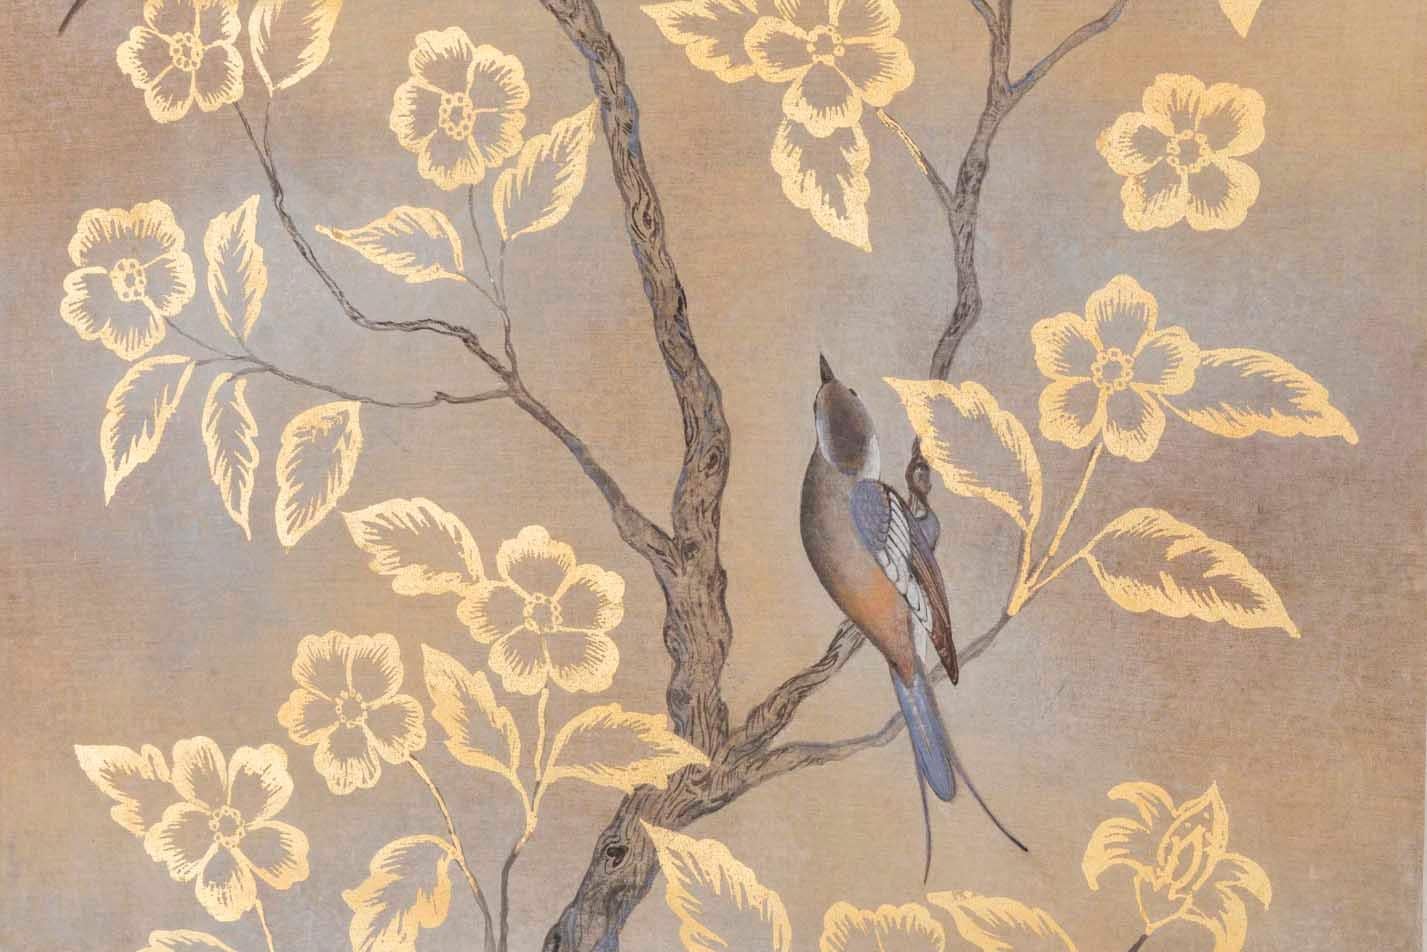 Painted canvas figuring three birds, two on a tree and the other one flying. The tree is represented with gilt leaves and flowers. Background in grey and brown tones.

Linen raw canvas hand painted with natural pigments and background gilt with